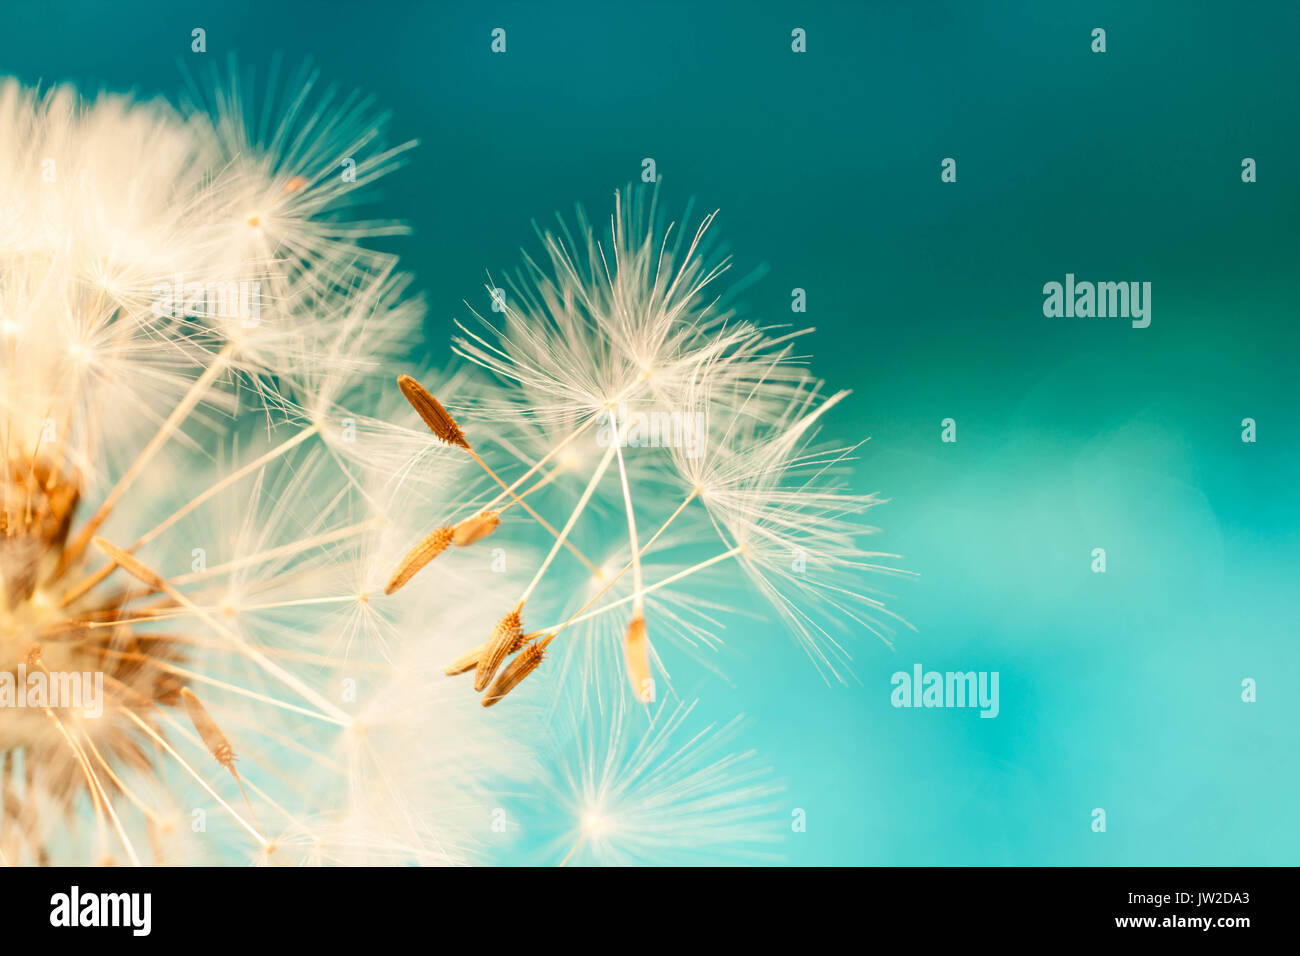 dandelion seeds blowing close up in abstract blue turquoise texture background Stock Photo